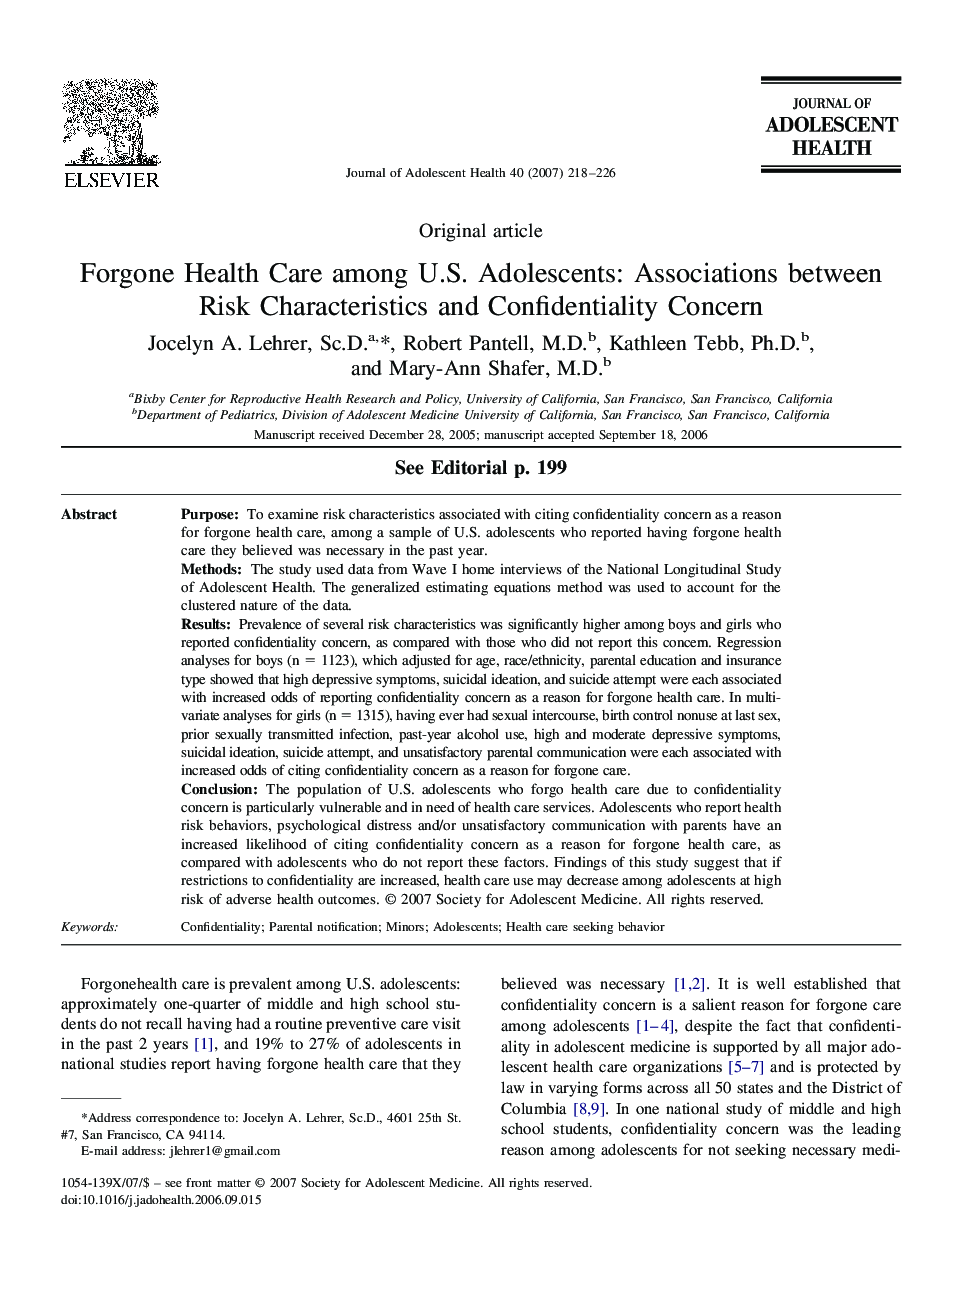 Forgone Health Care among U.S. Adolescents: Associations between Risk Characteristics and Confidentiality Concern